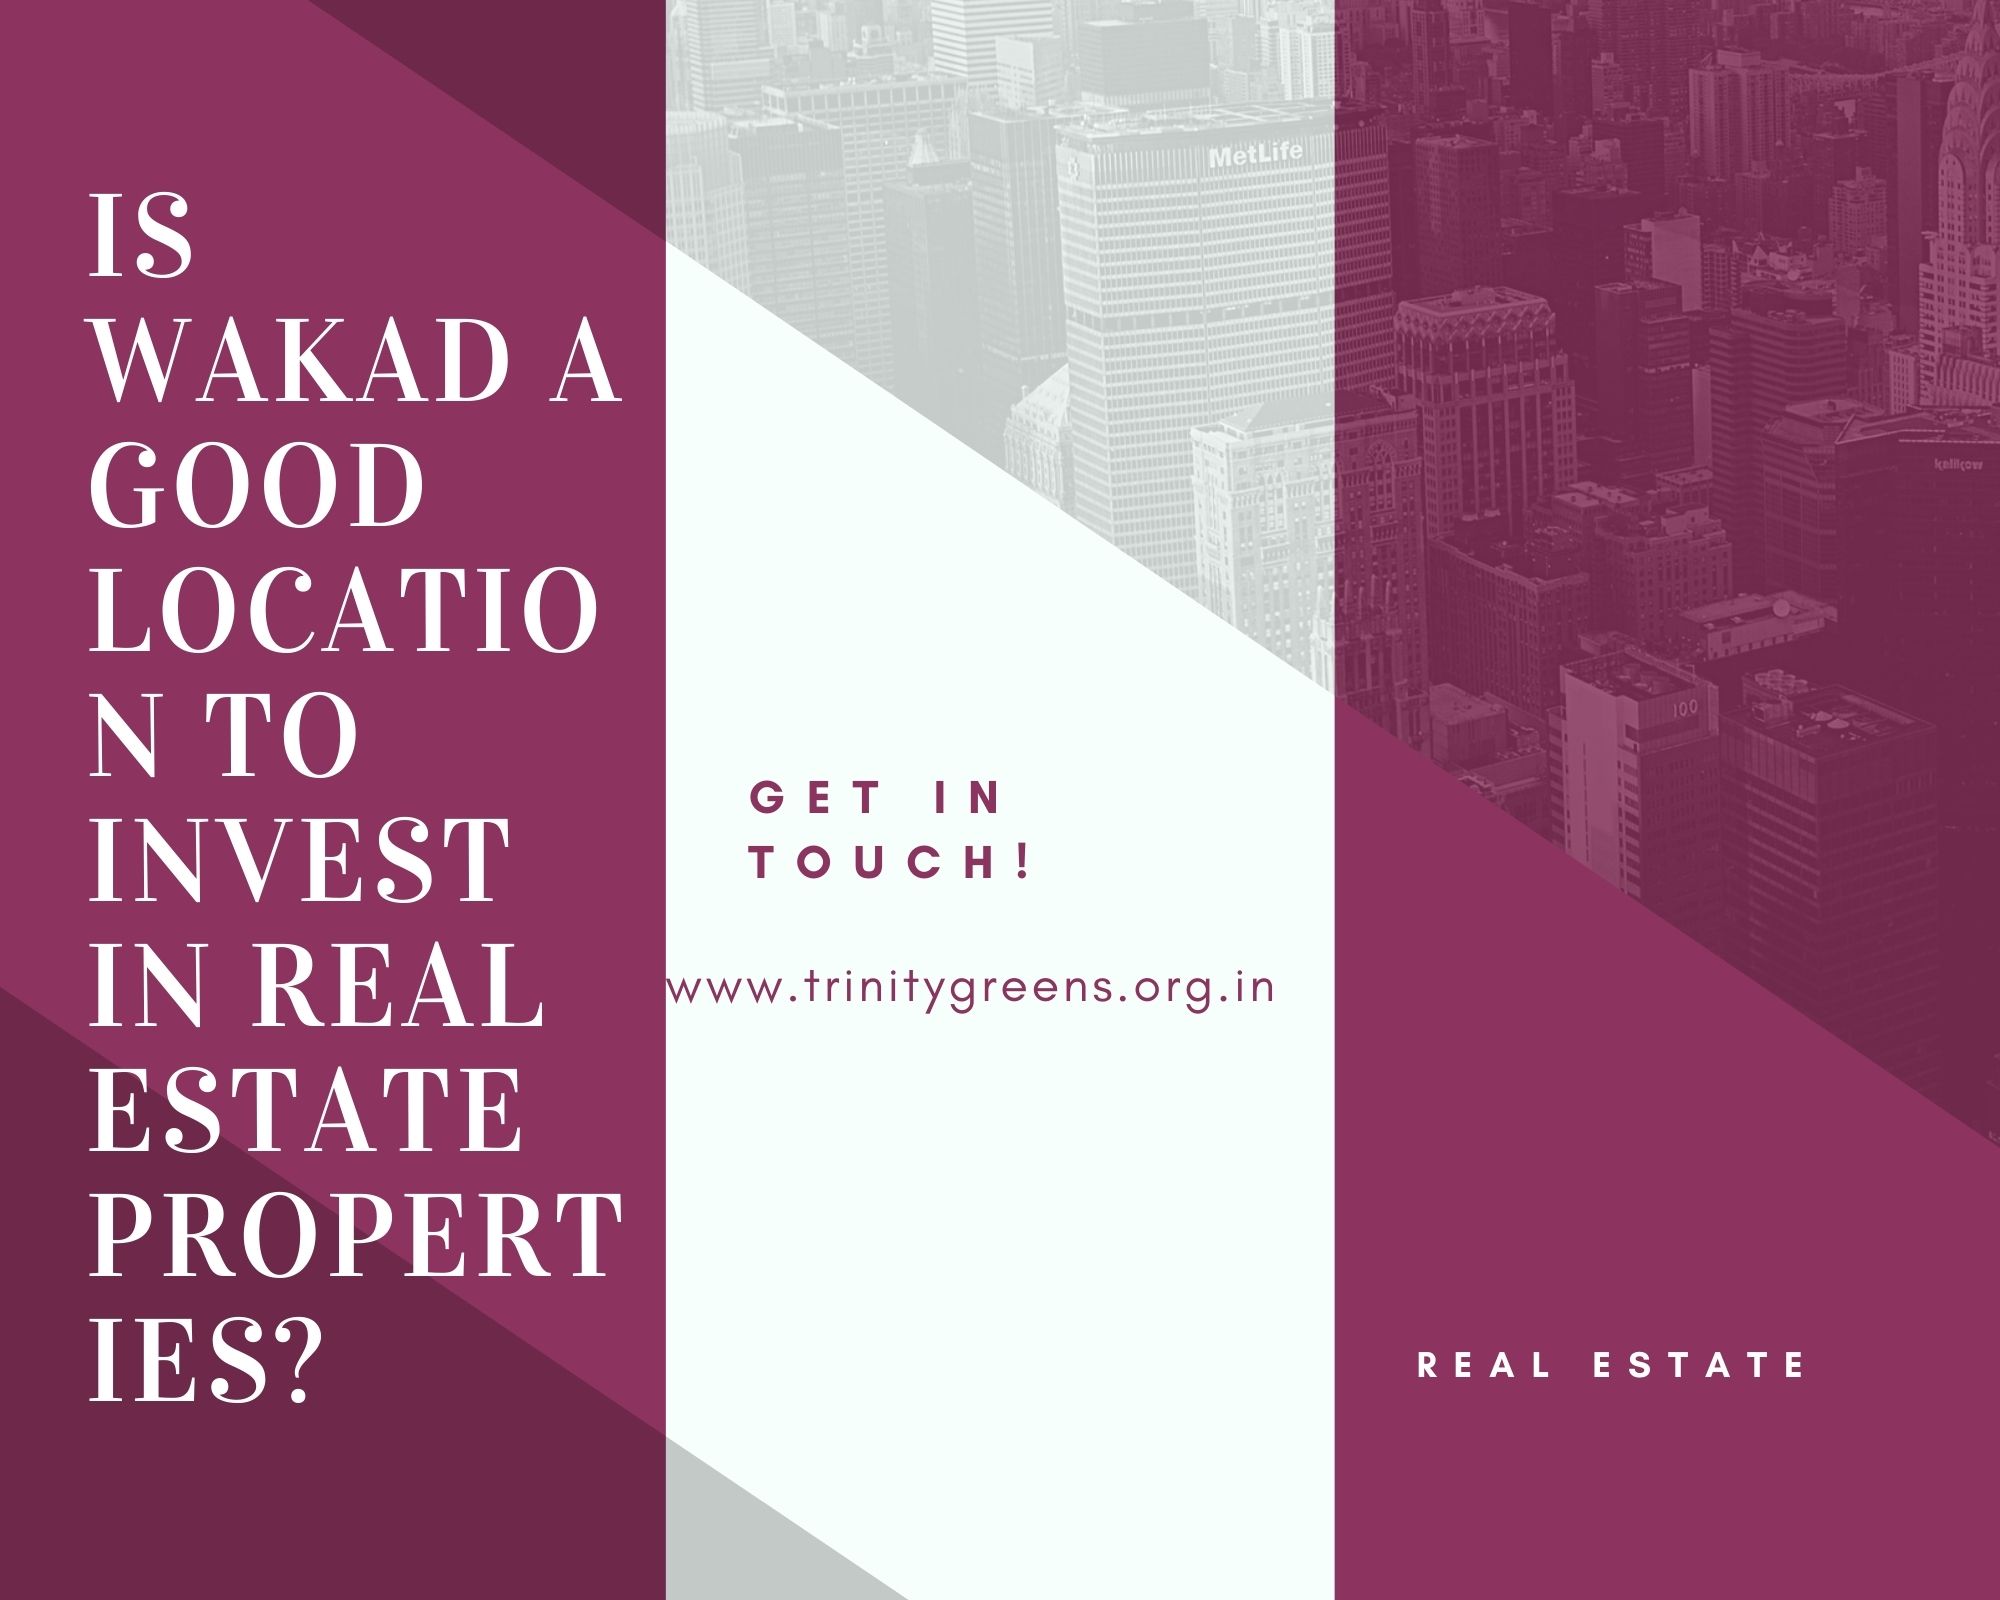 Is Wakad a good location to invest in real estate properties?